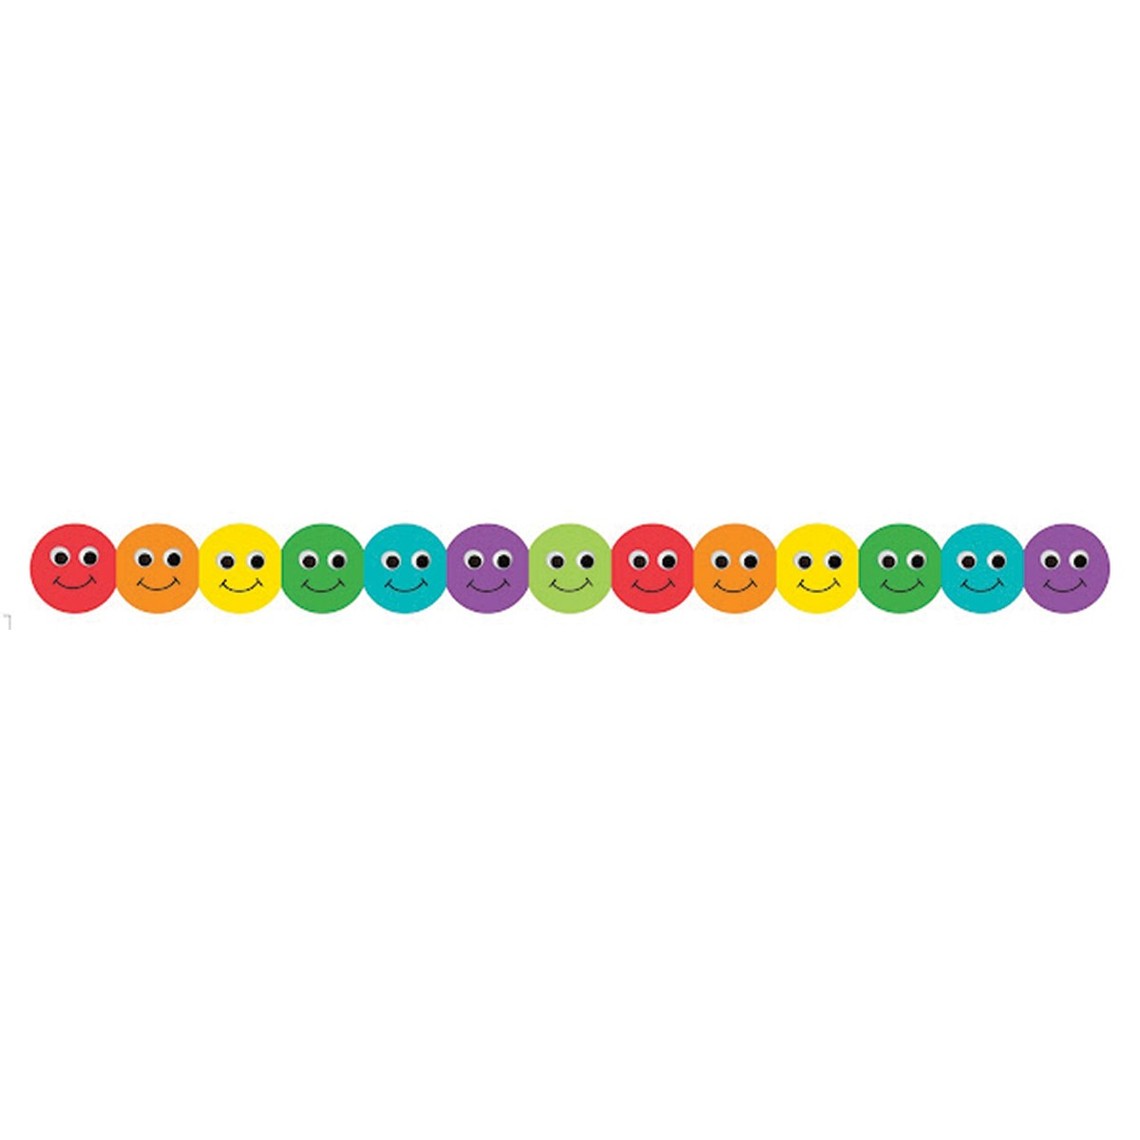 Smiley Face Border Clipart - Free to use Clip Art Resource